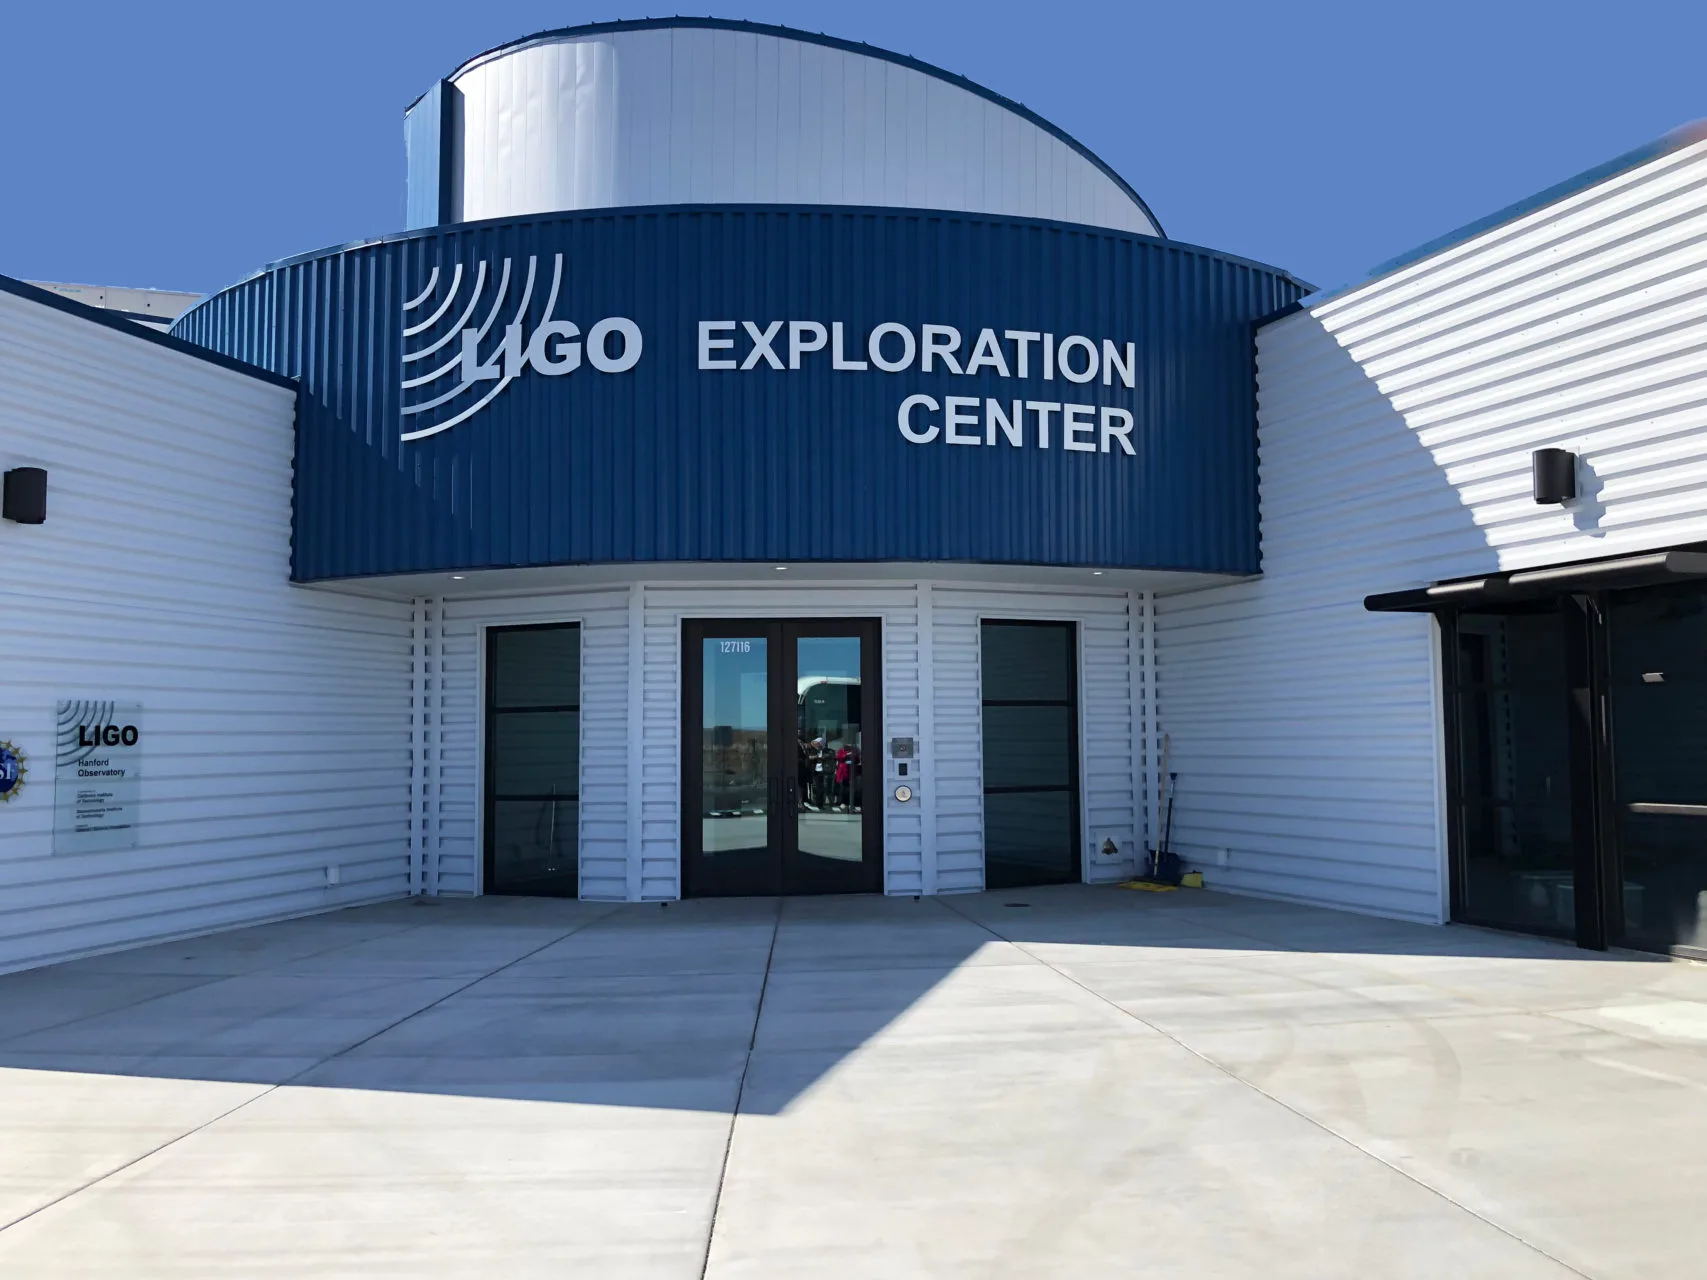 The LIGO Exploration Center, where you take the tour and learn about gravitational waves.